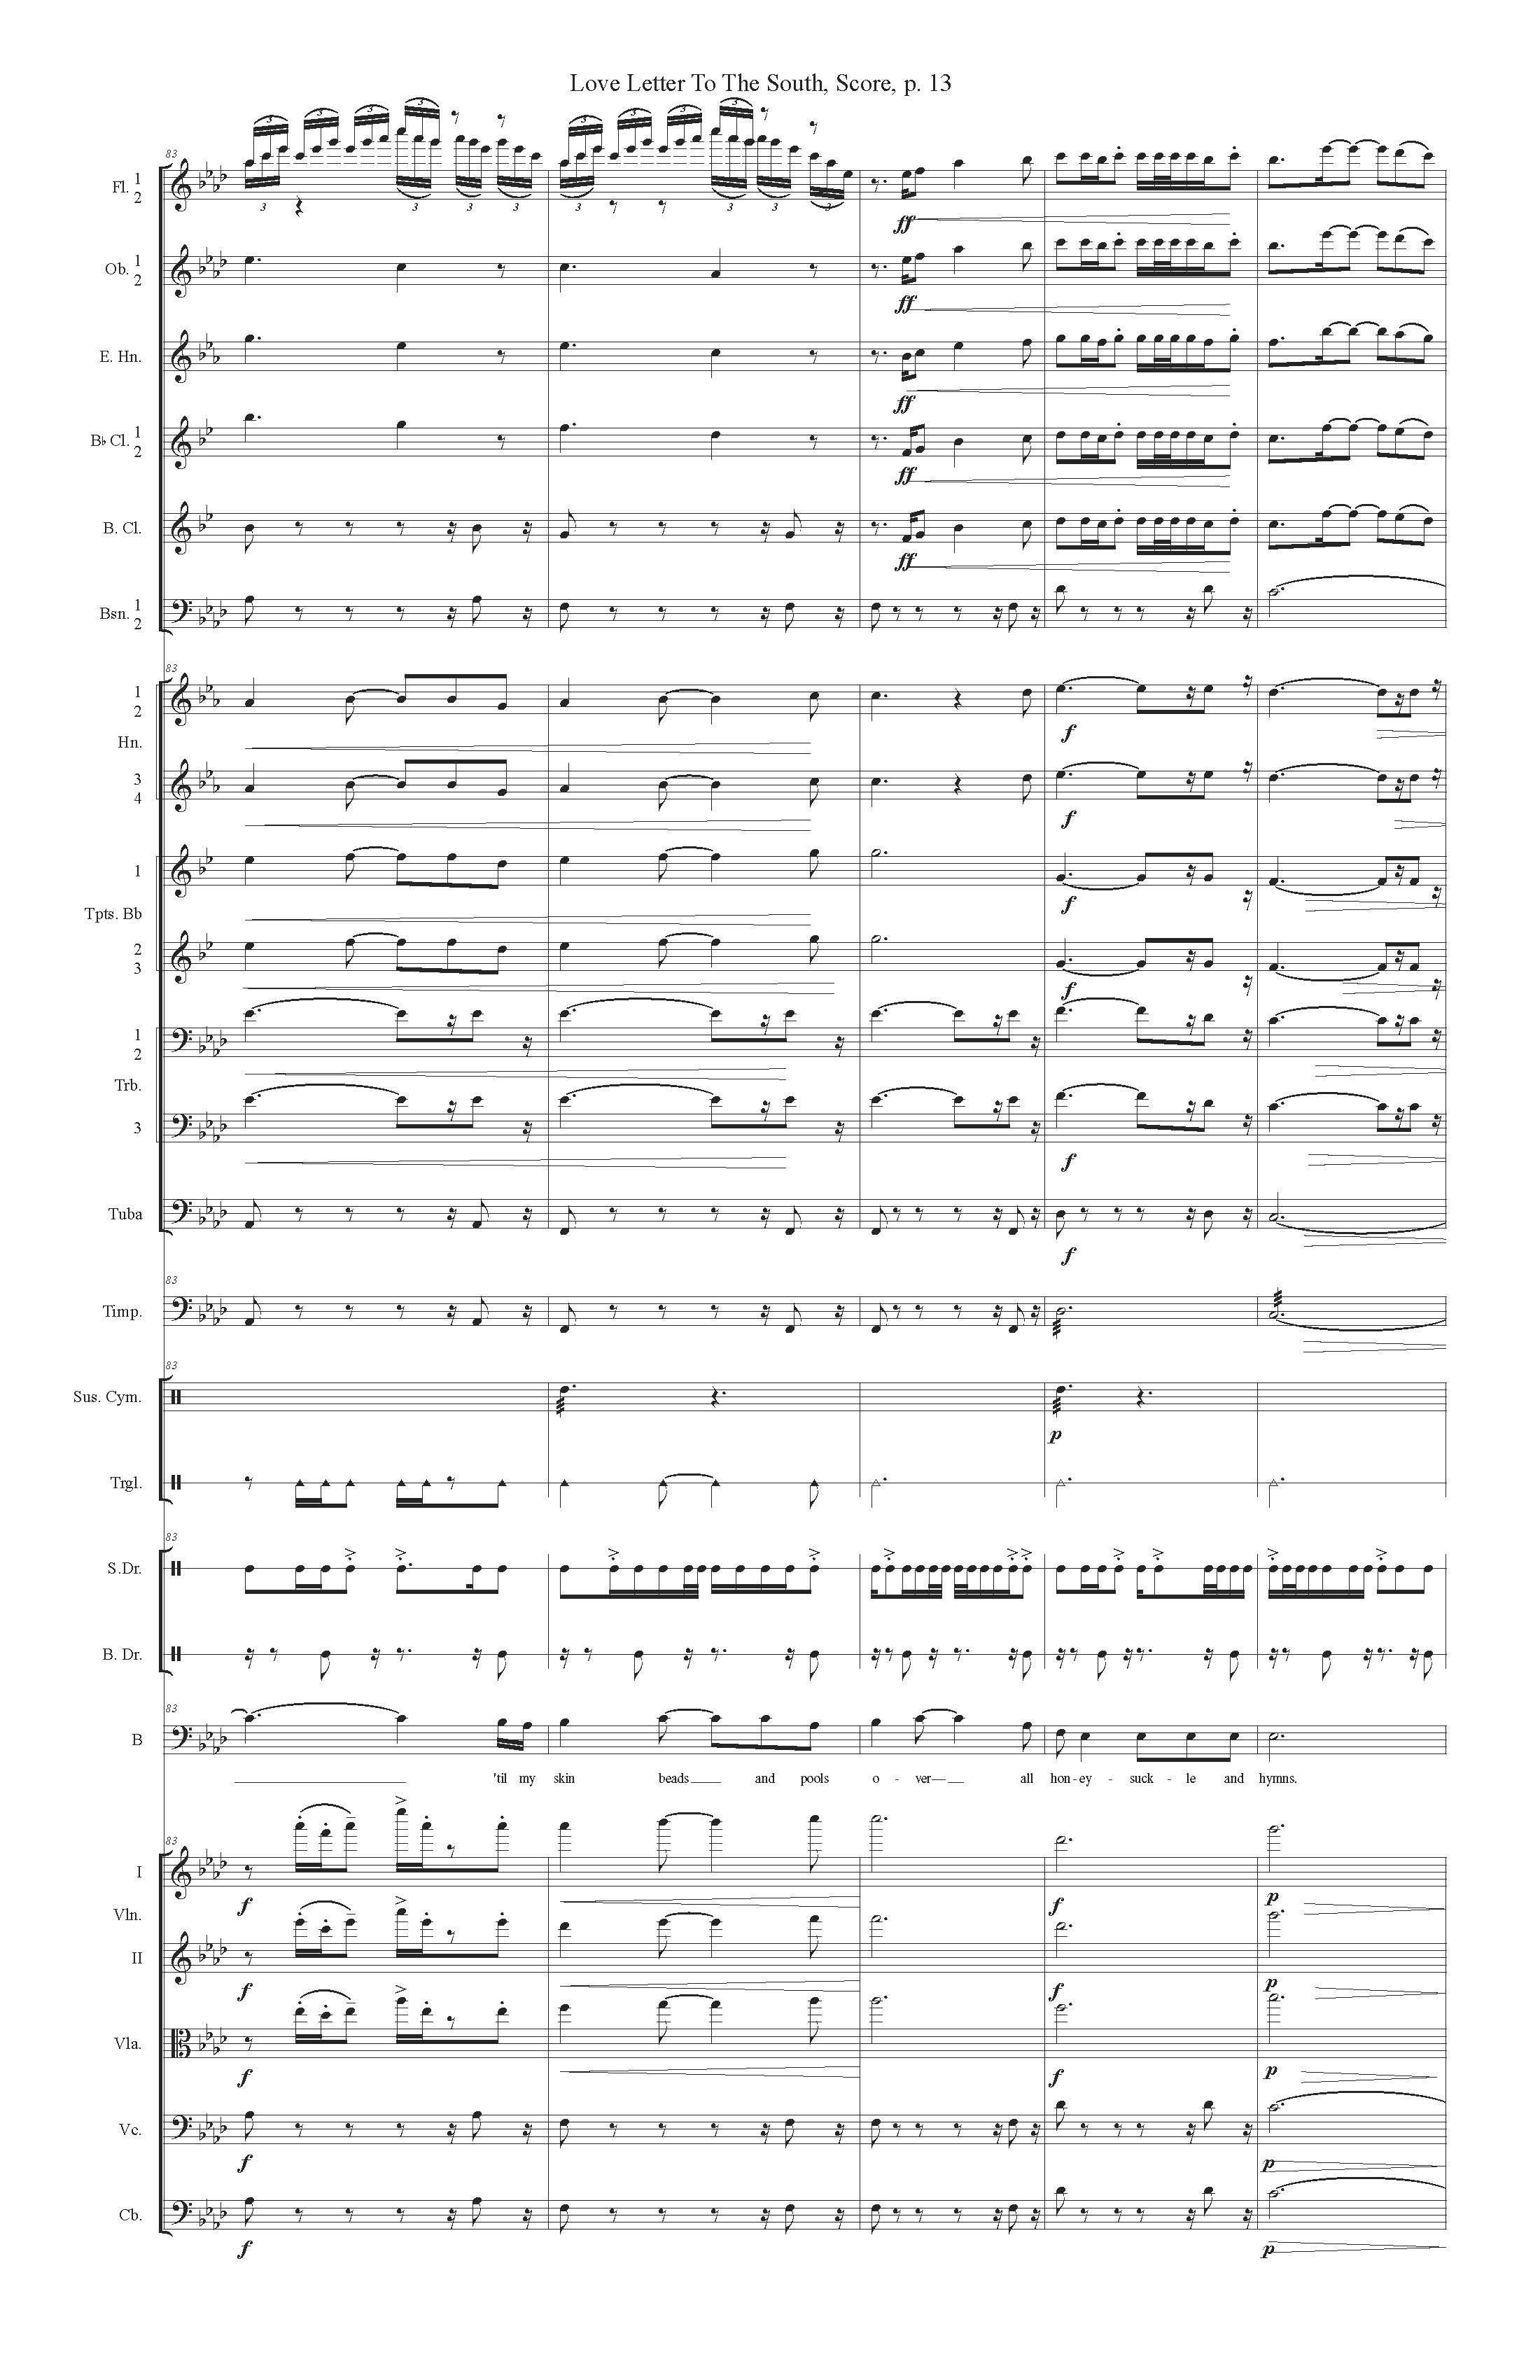 LOVE LETTER TO THE SOUTH ORCH - Score_Page_13.jpg